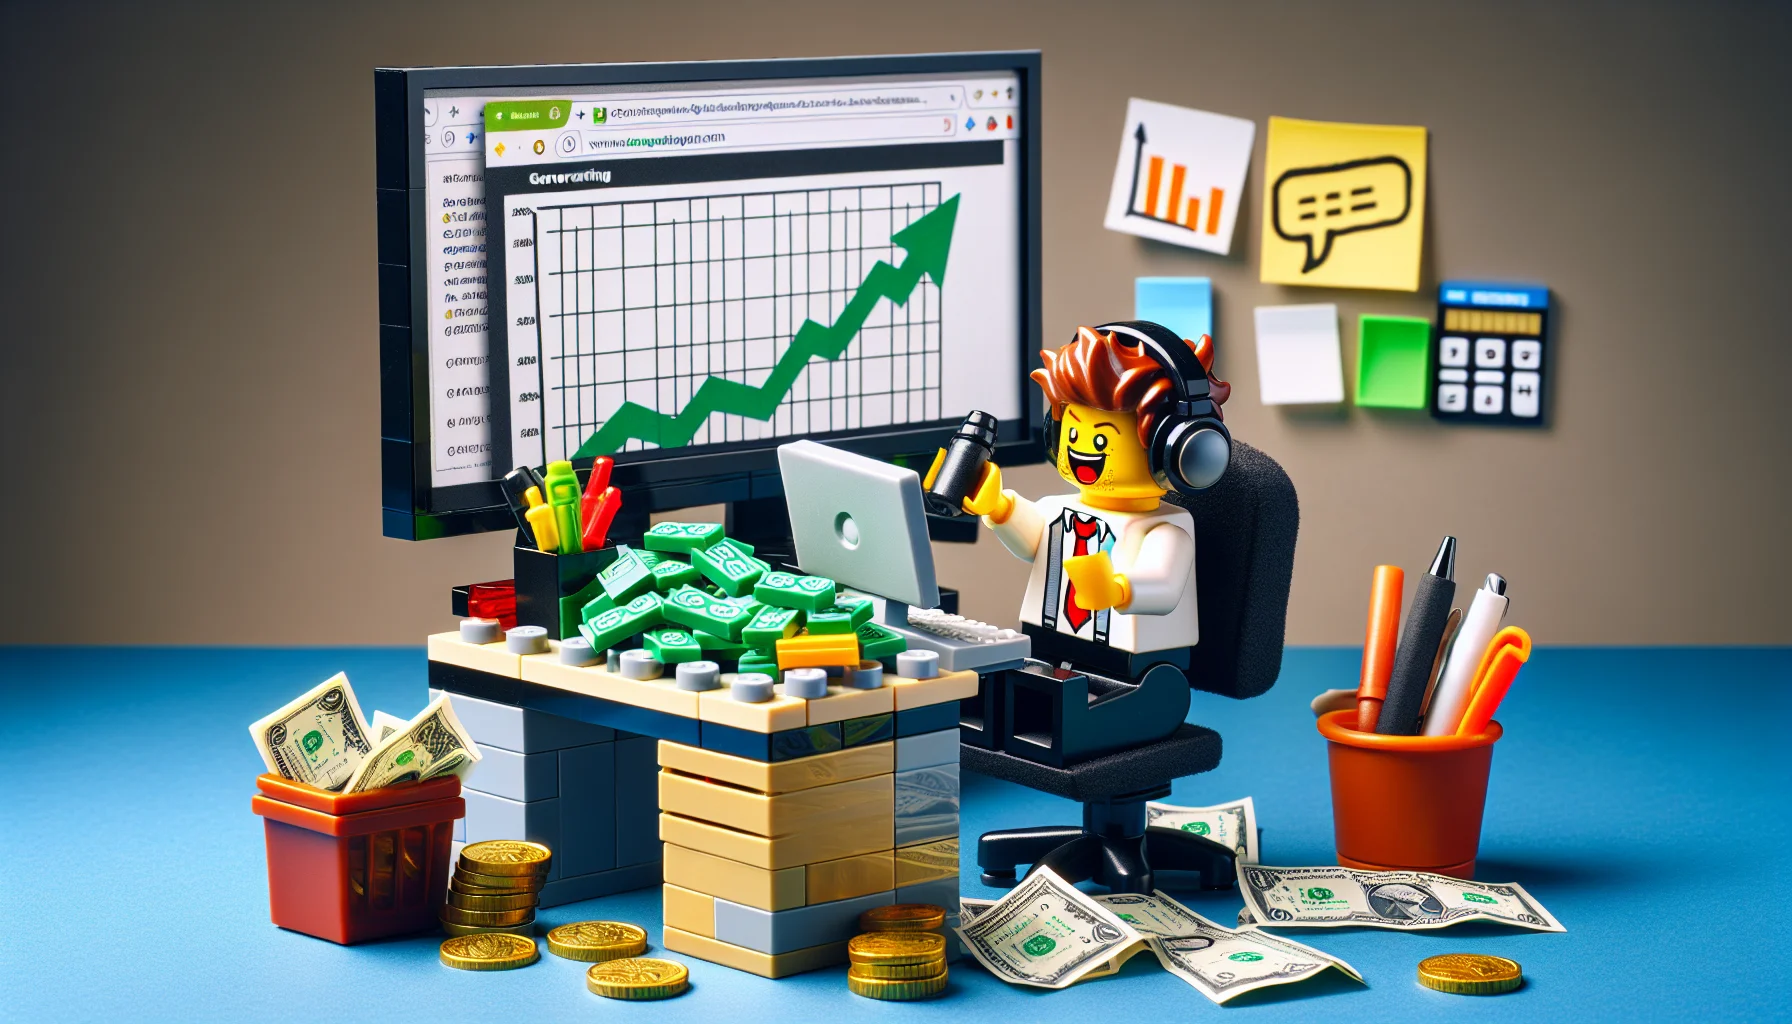 Create a comedic, realistic image of a Lego figurine in an appealing setting related to generating revenue on the internet. The figurine should be wearing headphones, sitting behind a computer desk crammed with currency bills and coins. There should be several browser windows open on the computer screen, one of which showing a bar chart with an upward trend indicating increasing profits. The decor should include business-related accessories like a calculator, pen holder and sticky notes with financial jargon written on them. Make sure to bring the humor element by showing the figurine's excited expressions, perhaps some party decorations, and a miniature cup of coffee spilling over due to the figurine's overt excitement.